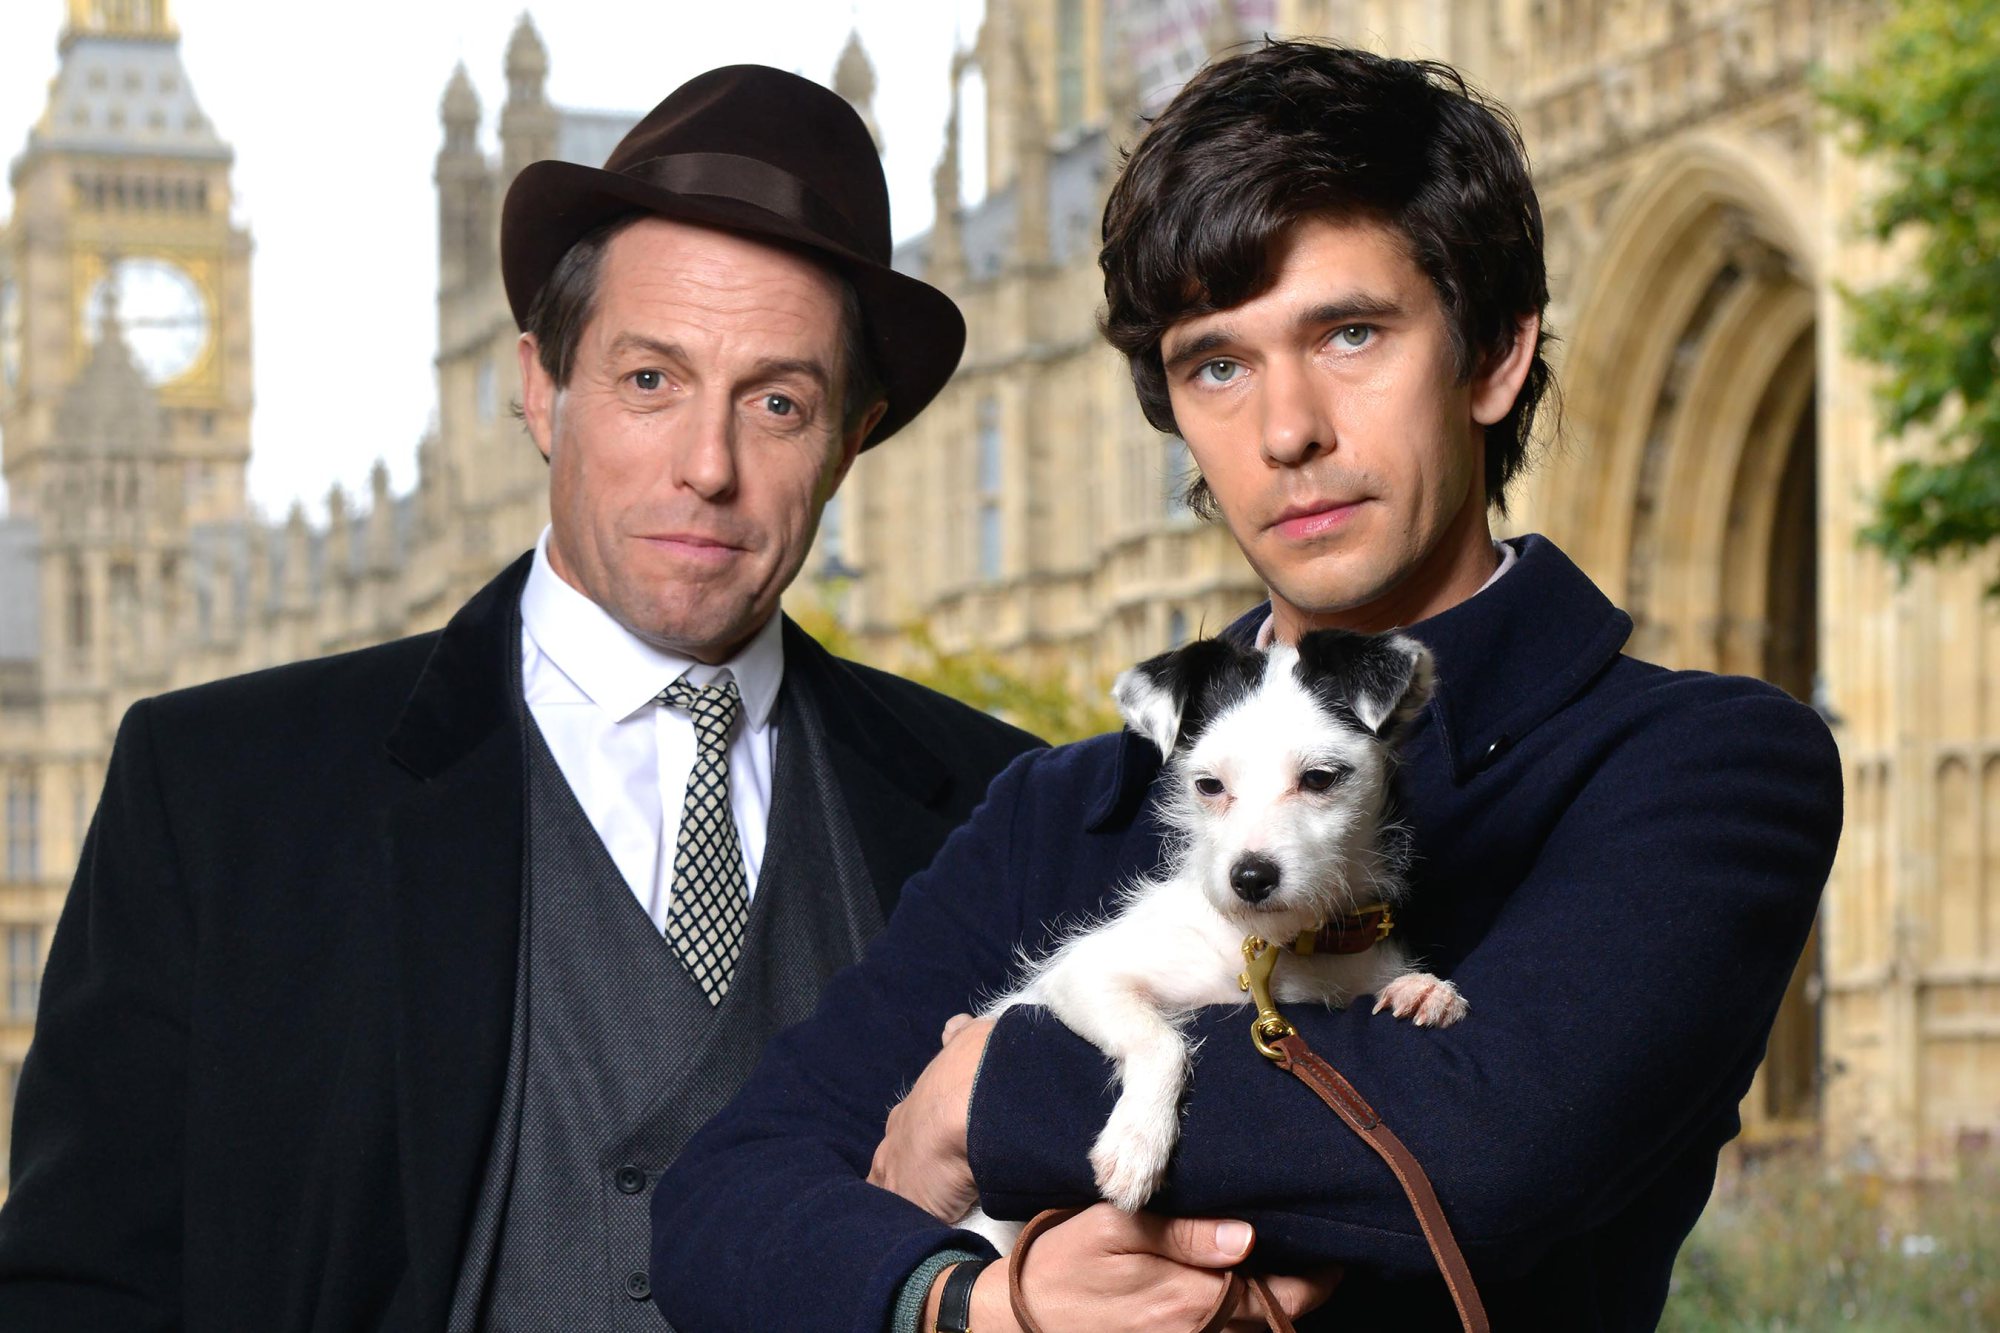 Hugh Grant and Ben Whishaw in "A Very English Scandal"  (Photo: BBC)